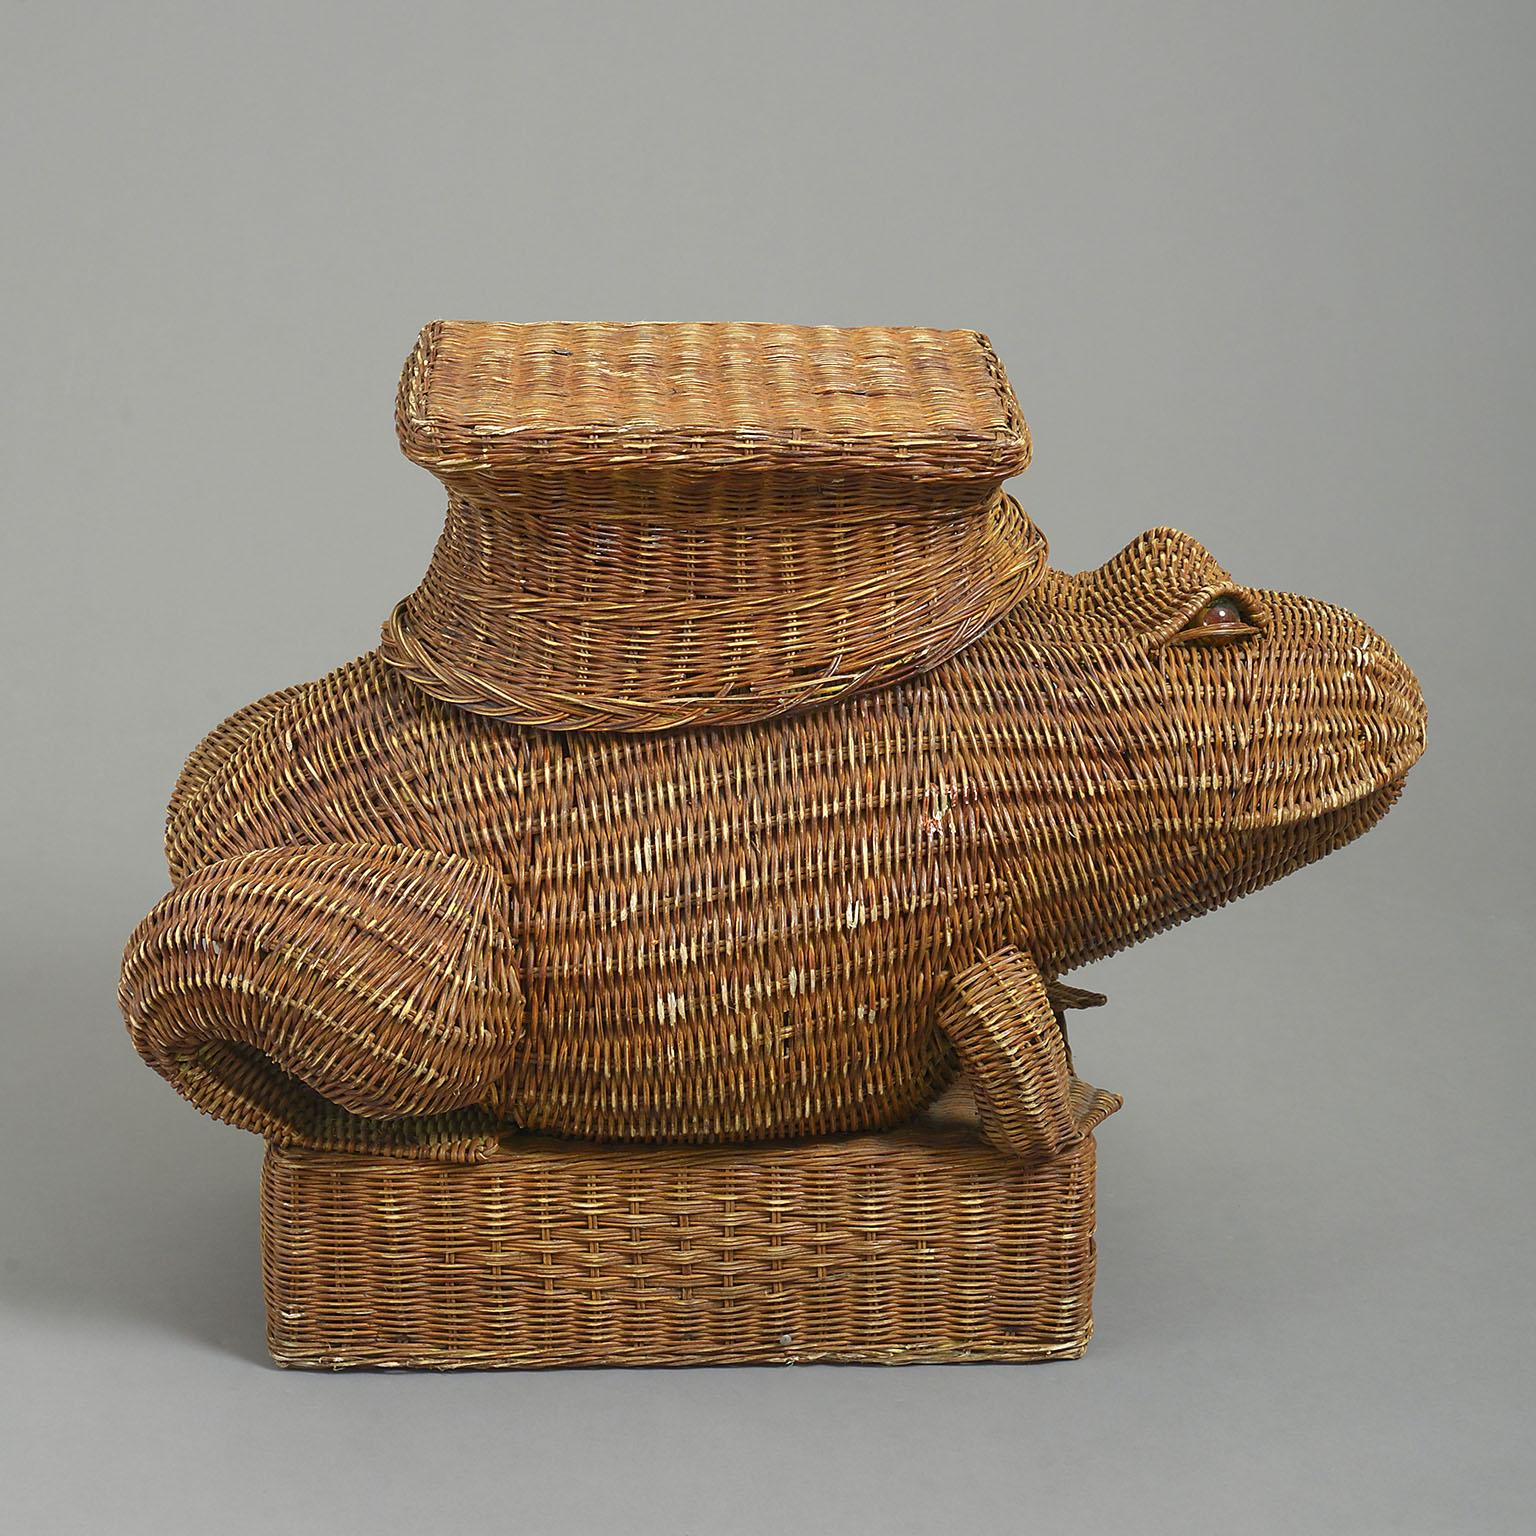 A charming mid-century wicker work frog table with glass eyes supporting a table surface on its back and standing on a platform base.